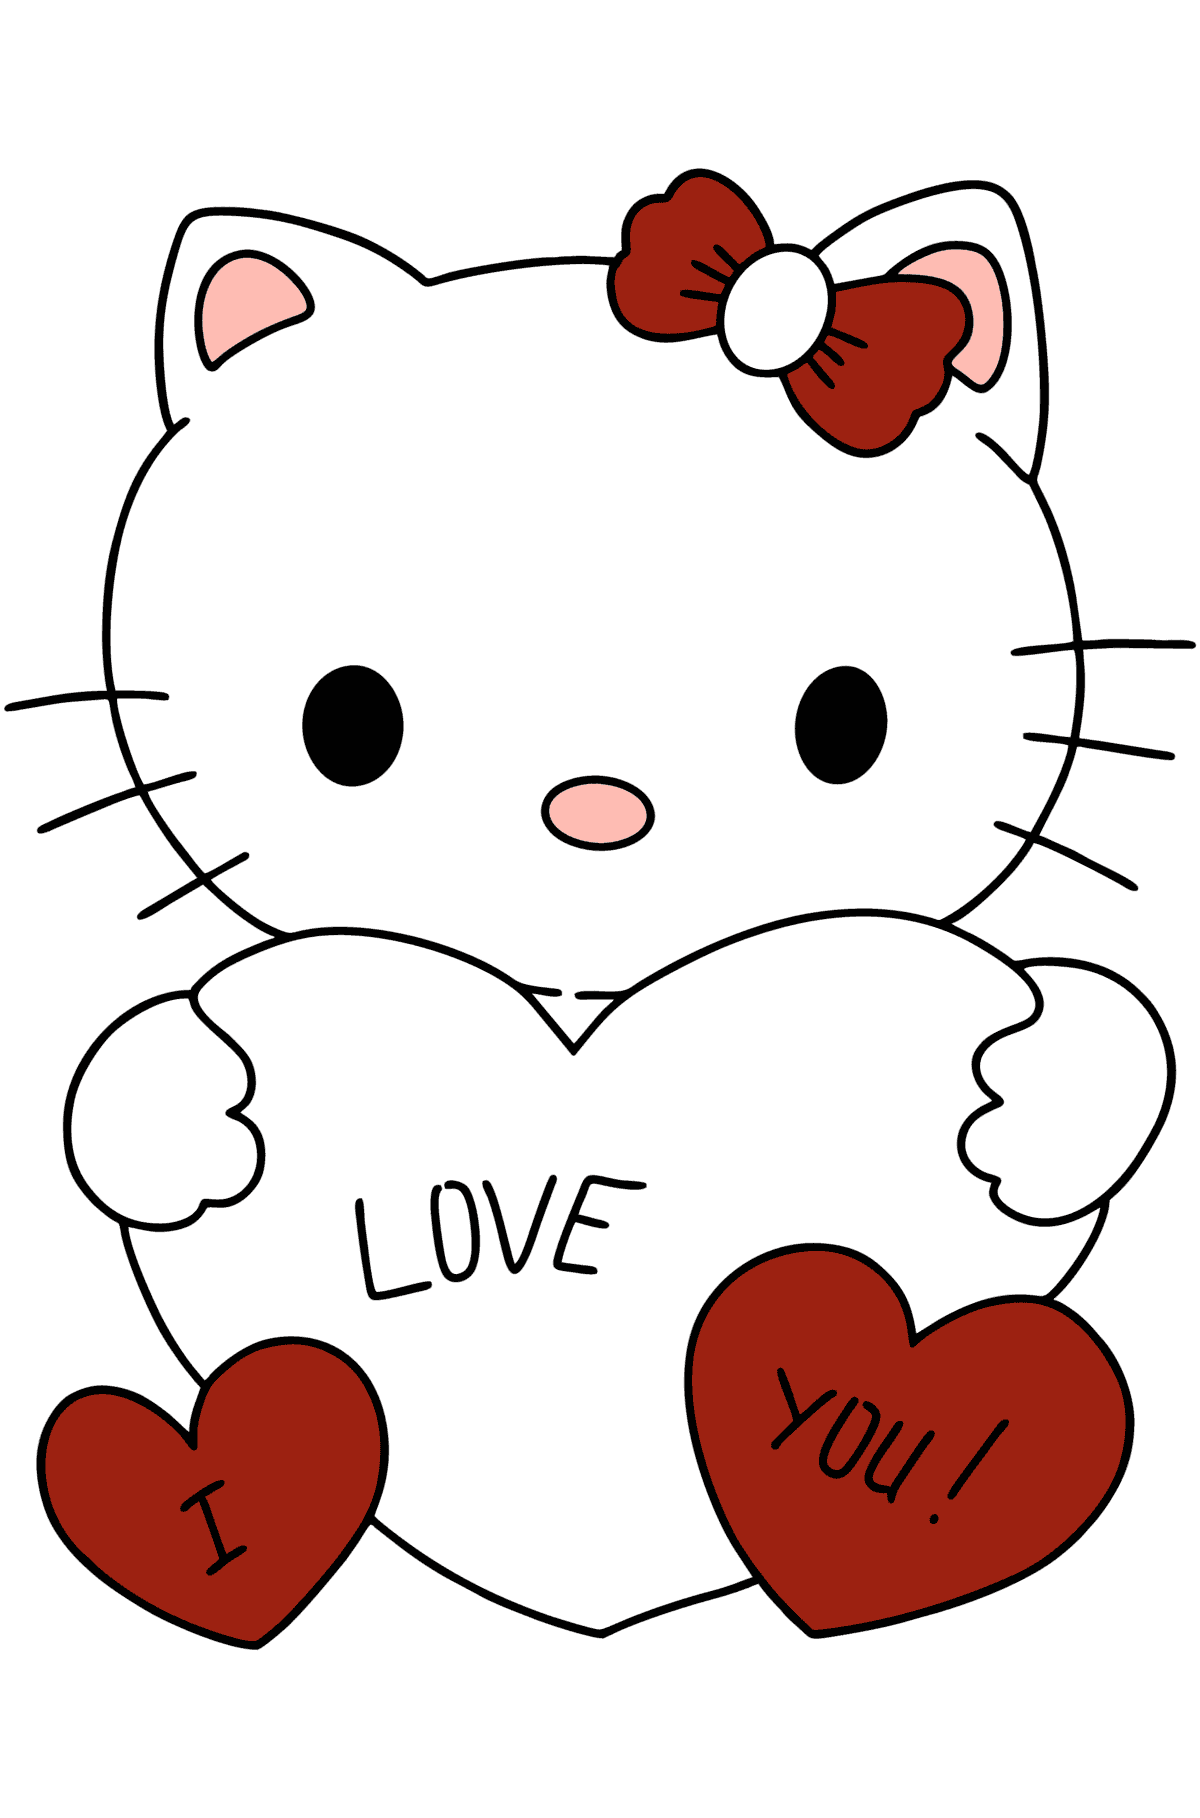 Hello Kitty and hearts colouring page - Coloring Pages for Kids